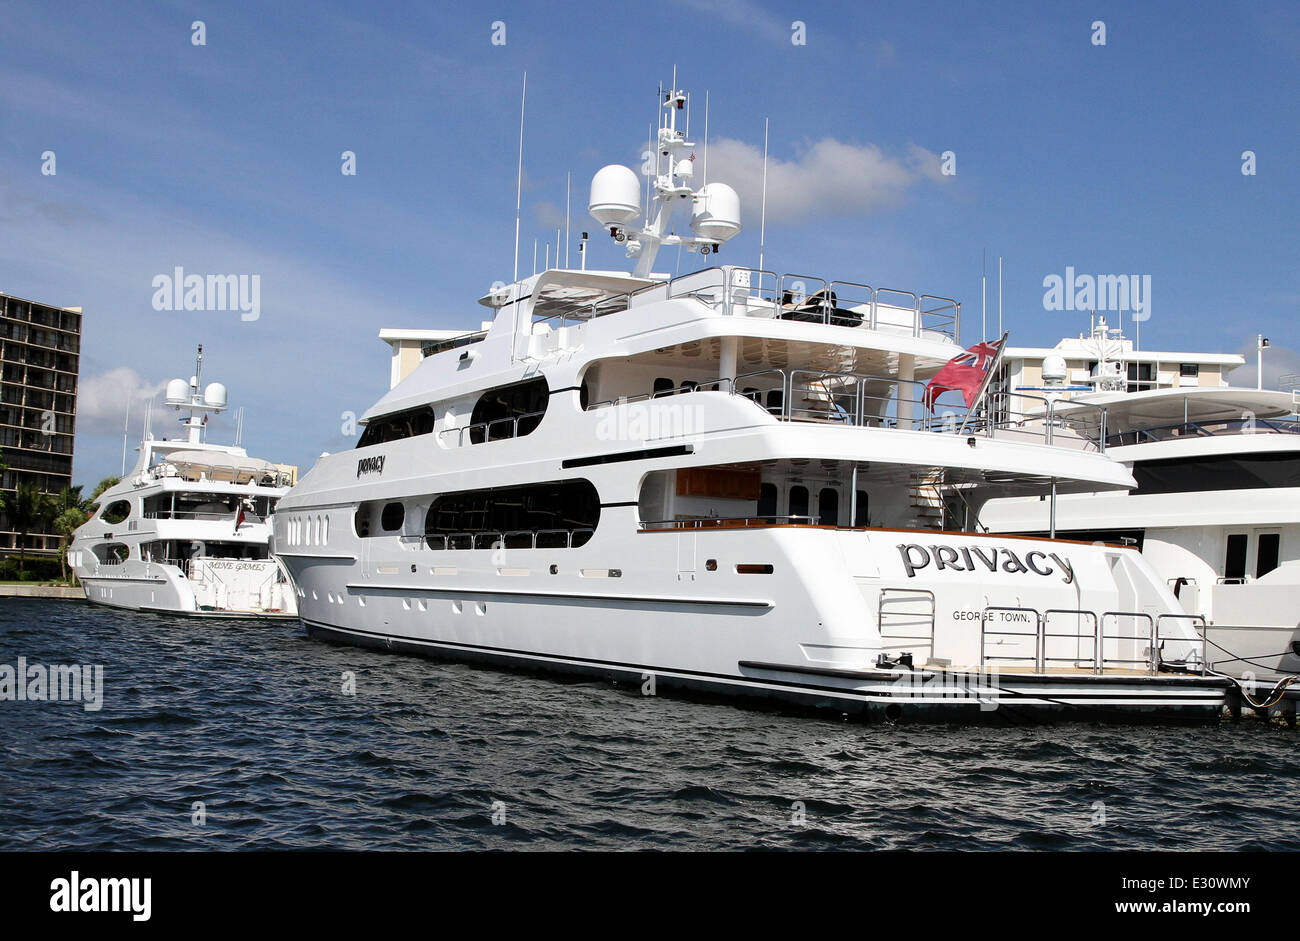 The super yacht 'Mine Games' owned by Chris Cline, top is parked in front of 'Privacy', owned by Tiger Woods, bottom,  Cline is said to be dating Elin Nordegren, Tigers Woods ex-wife. The yachts are seen here  docked in Jupiter Florida Monday April 29, 2013  Featuring: Atmosphere Where: Jupiter, Florida, United States When: 29 Apr 2013 Stock Photo